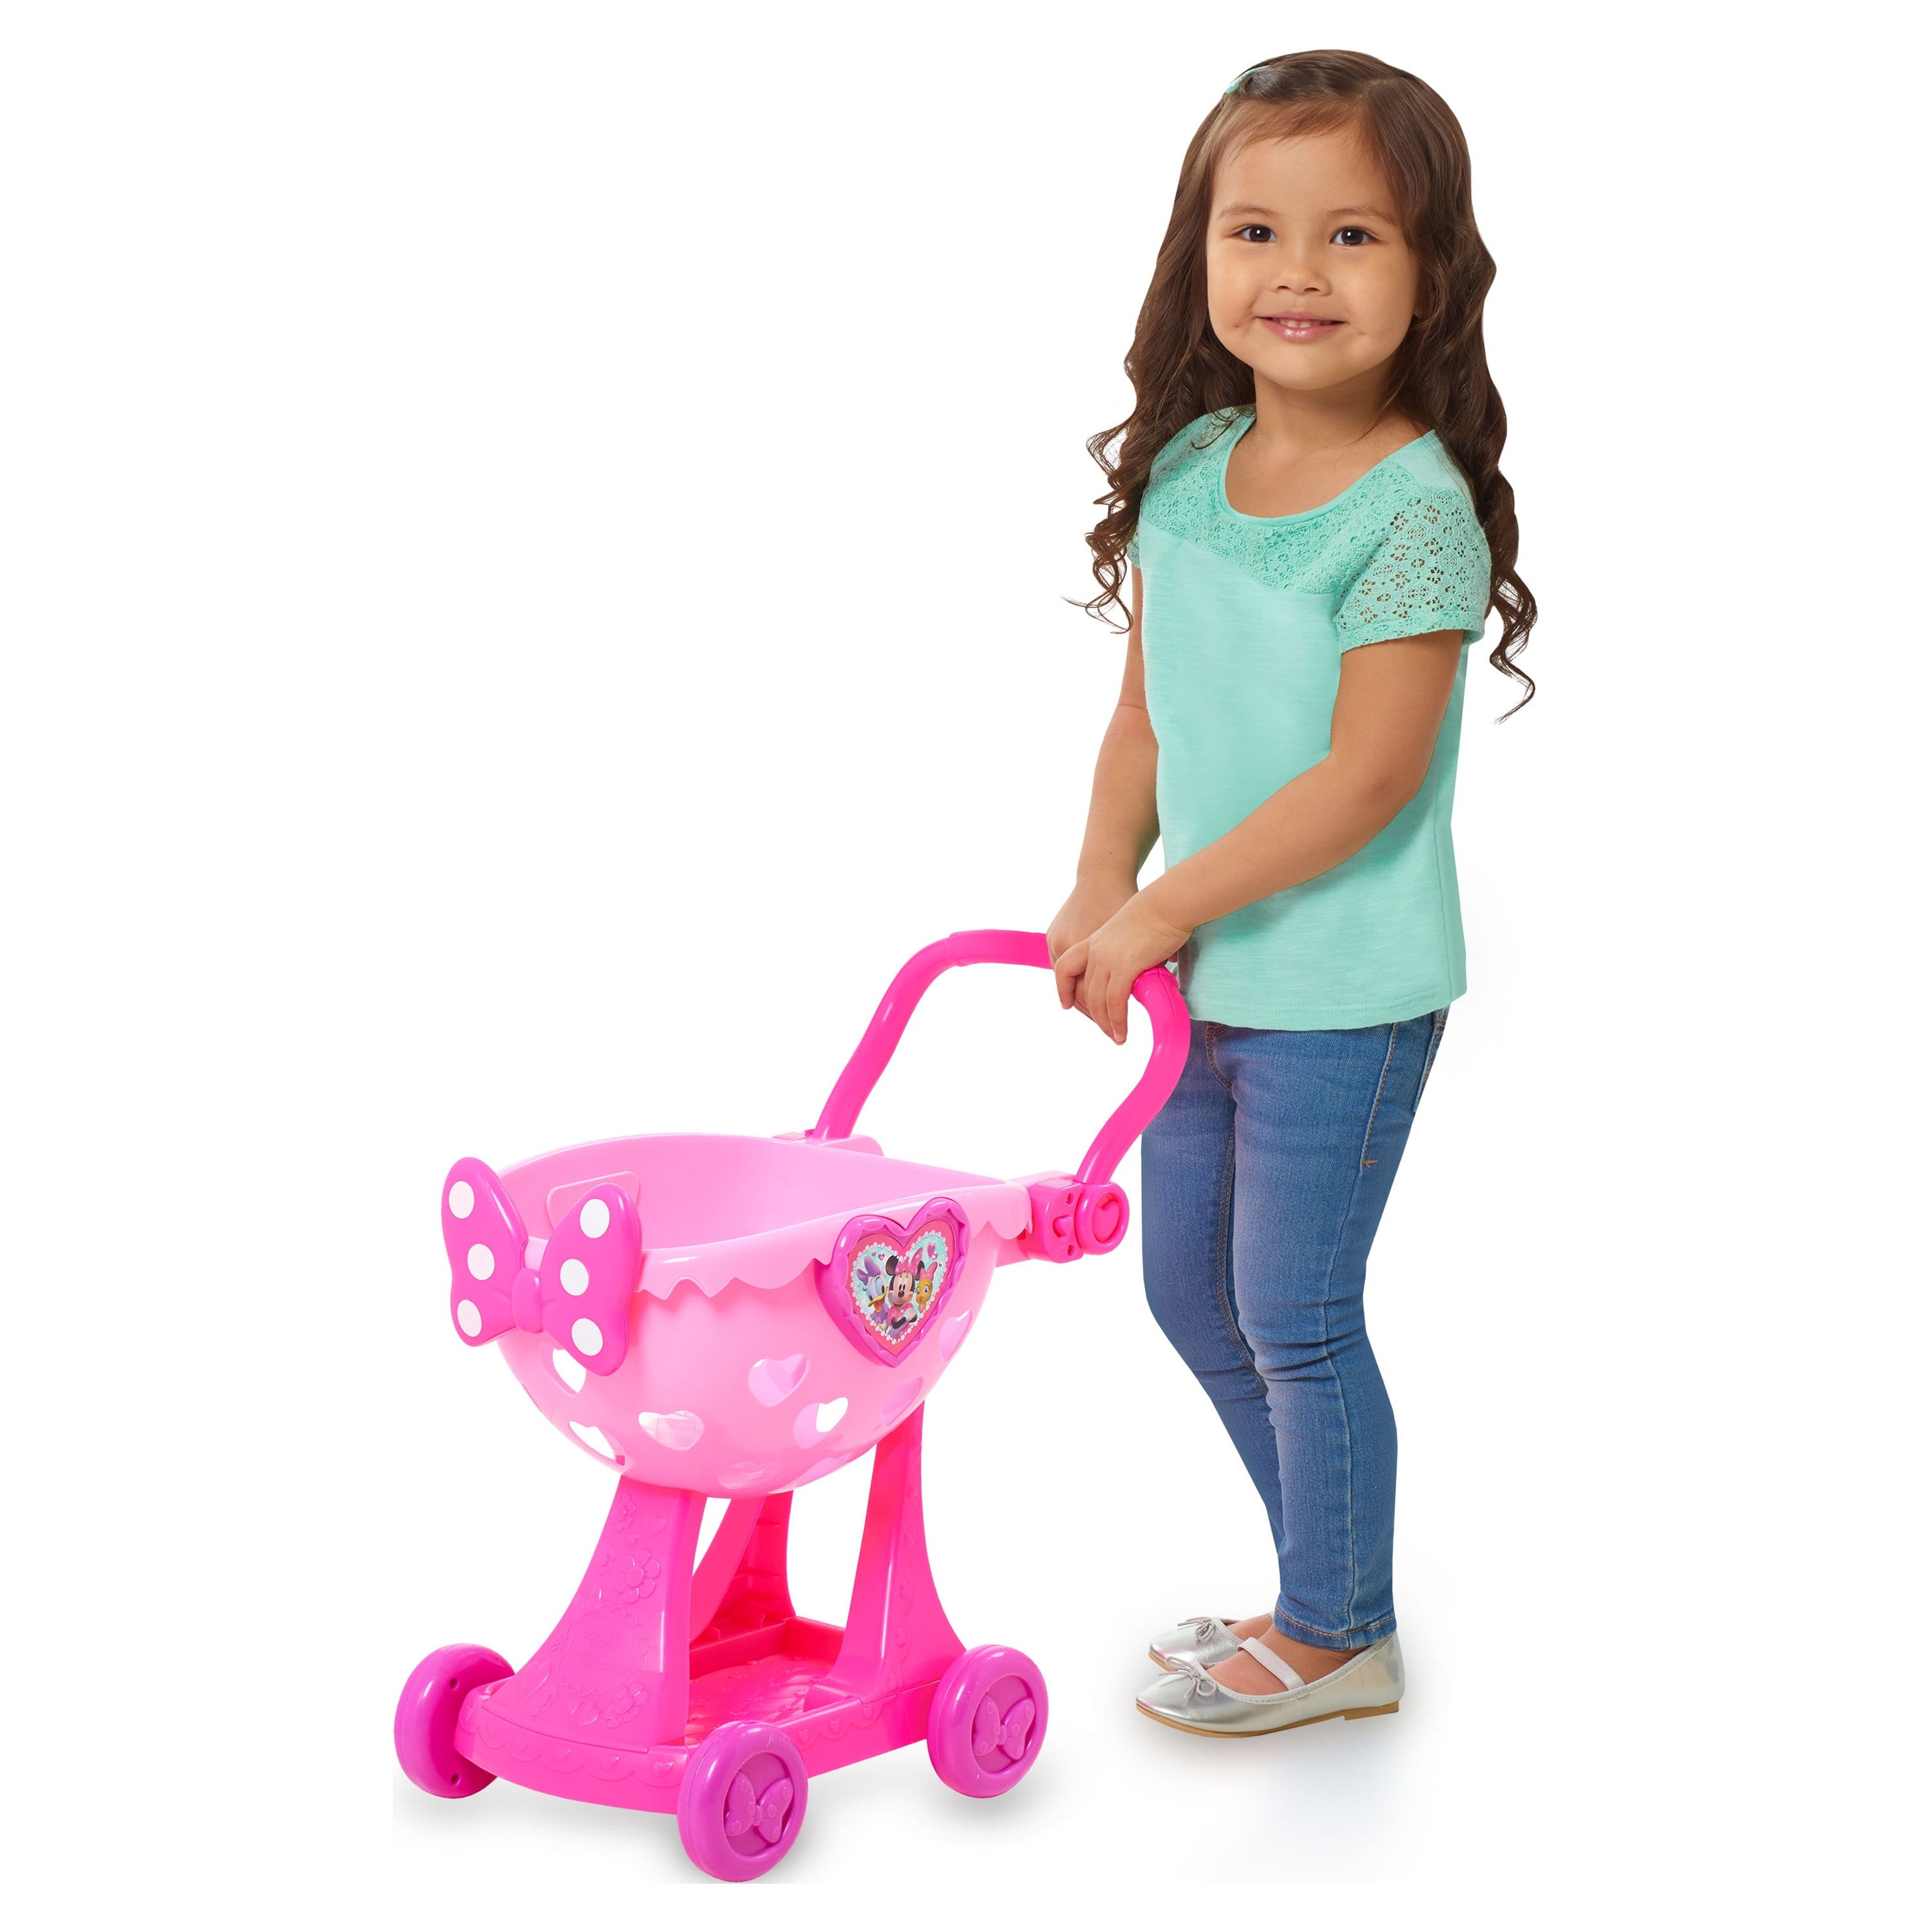 Minnie's Happy Helpers Bowtique Shopping Cart, Dress Up and Pretend Play, Officially Licensed Kids Toys for Ages 3 Up, Gifts and Presents - image 3 of 9